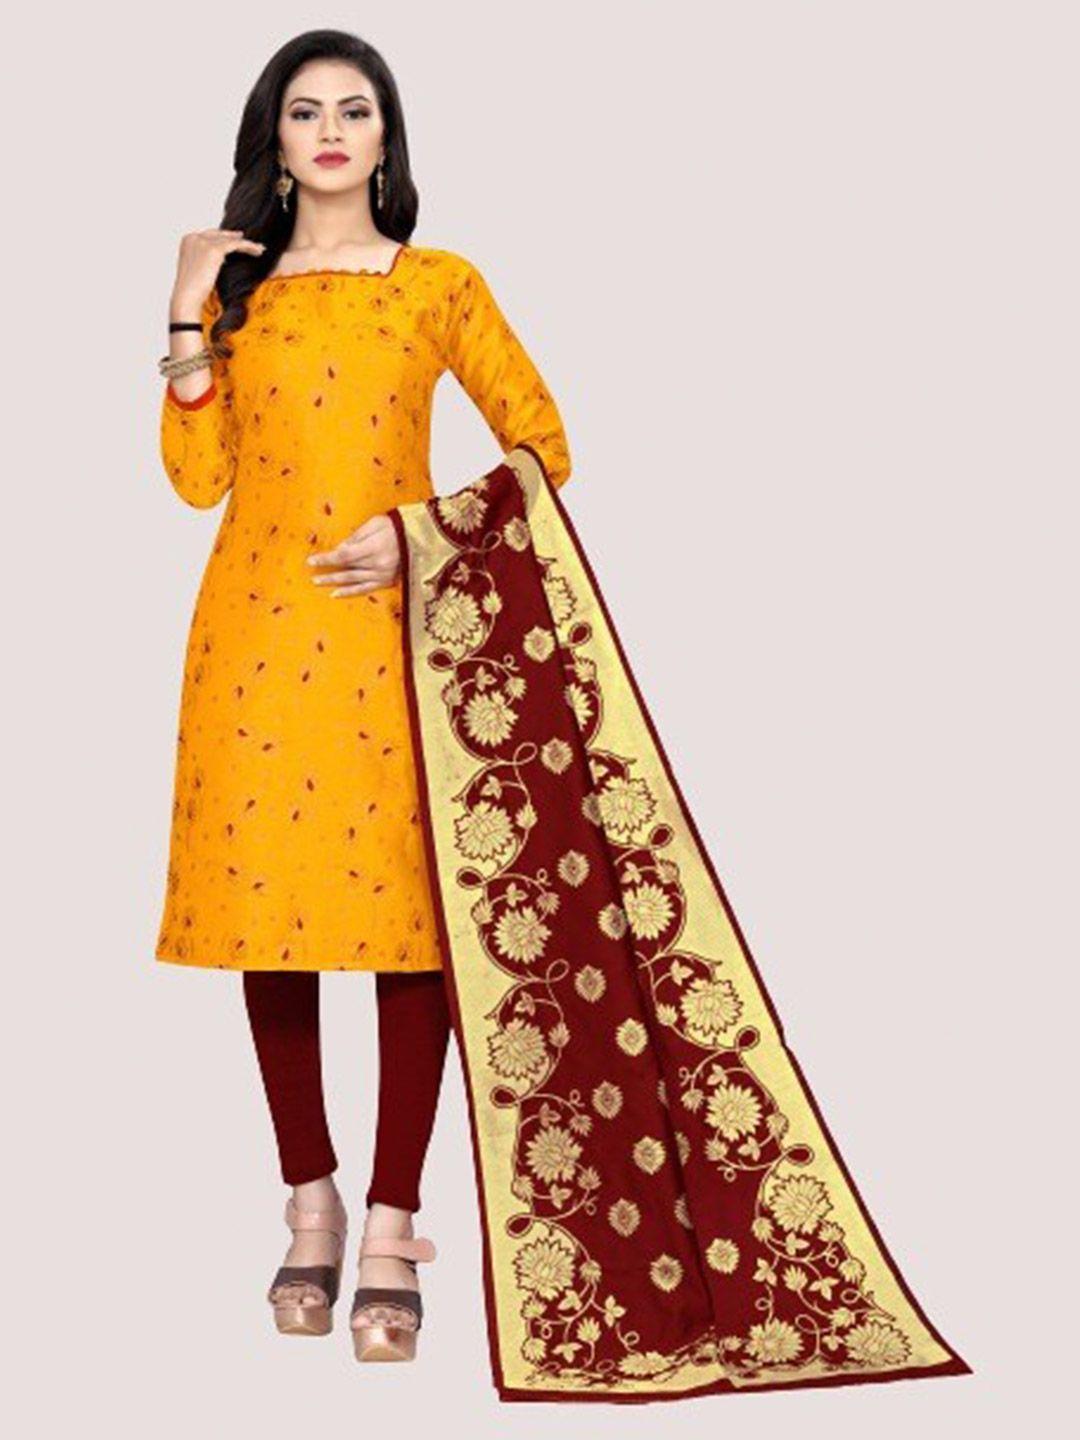 morly women yellow & red dupion silk unstitched dress material